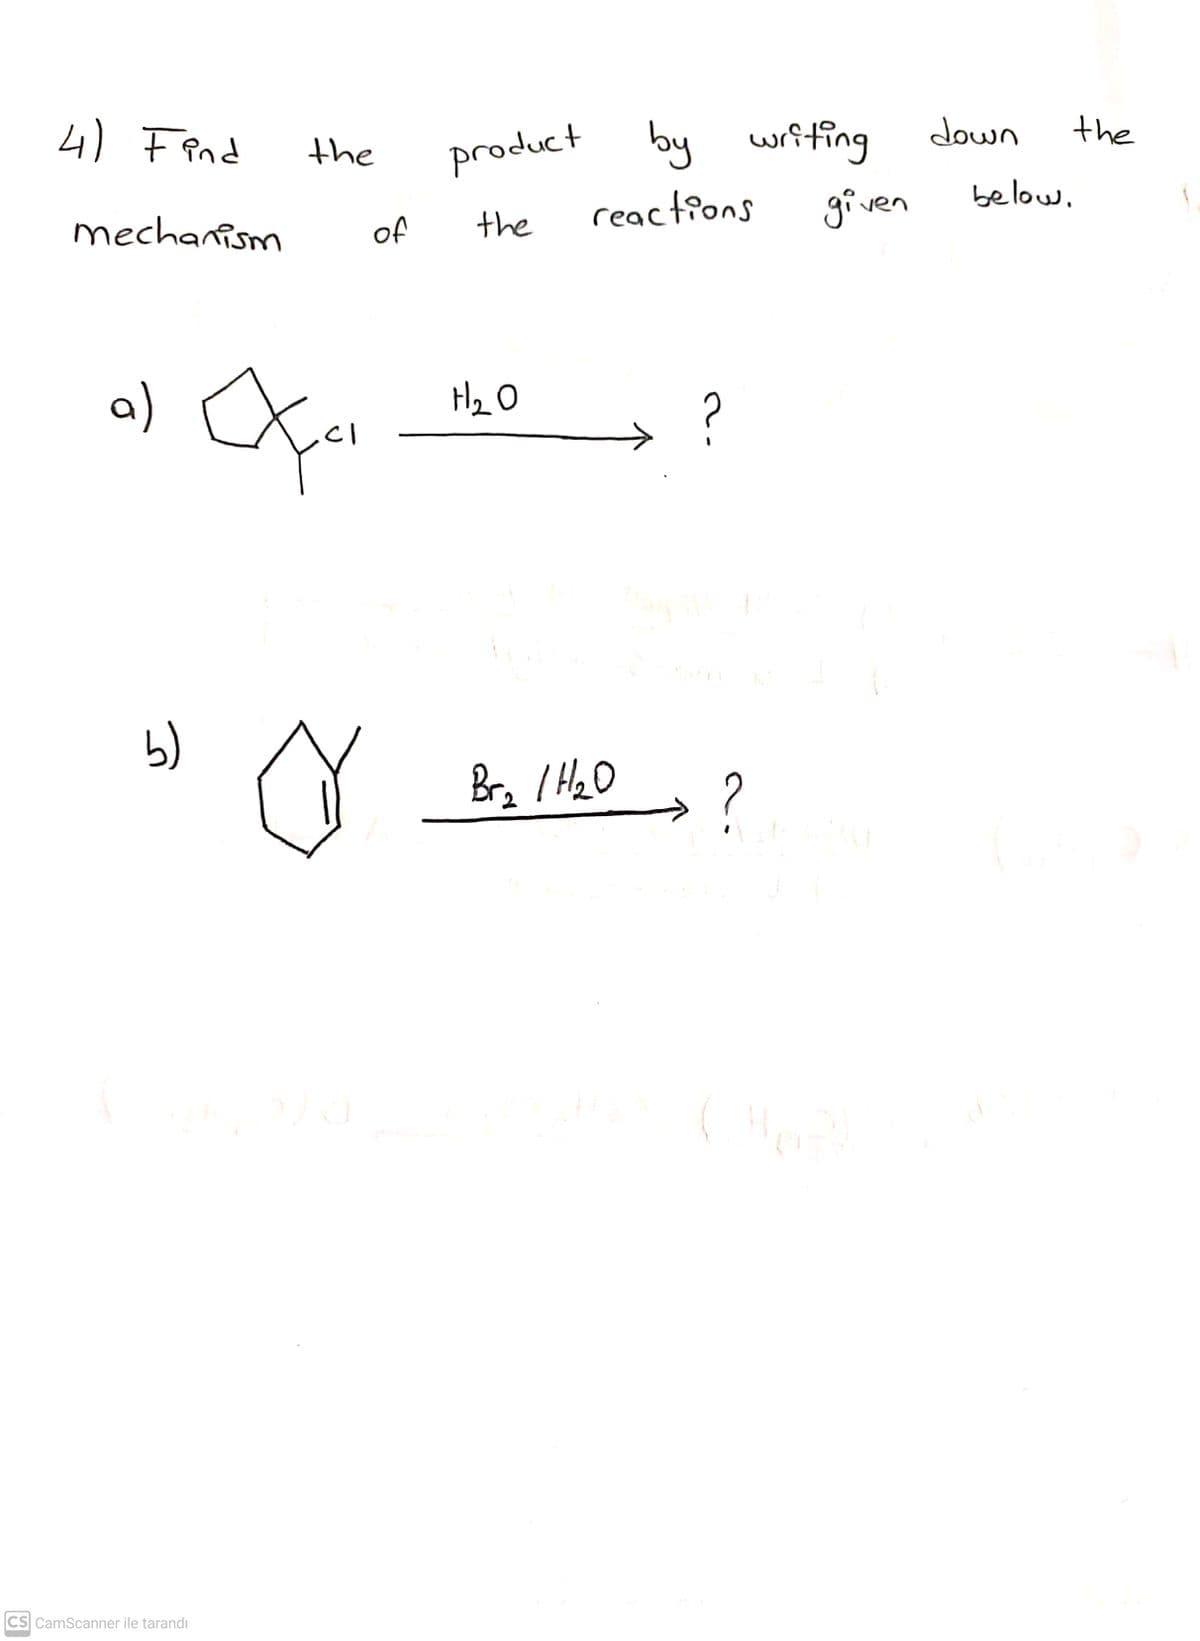 4) Fend
product by writing
down
the
the
below,
reactions
given
mechanism
of
the
a)
H2 O
?
b)
Brz I HzO
CS CamScanner ile tarandı
